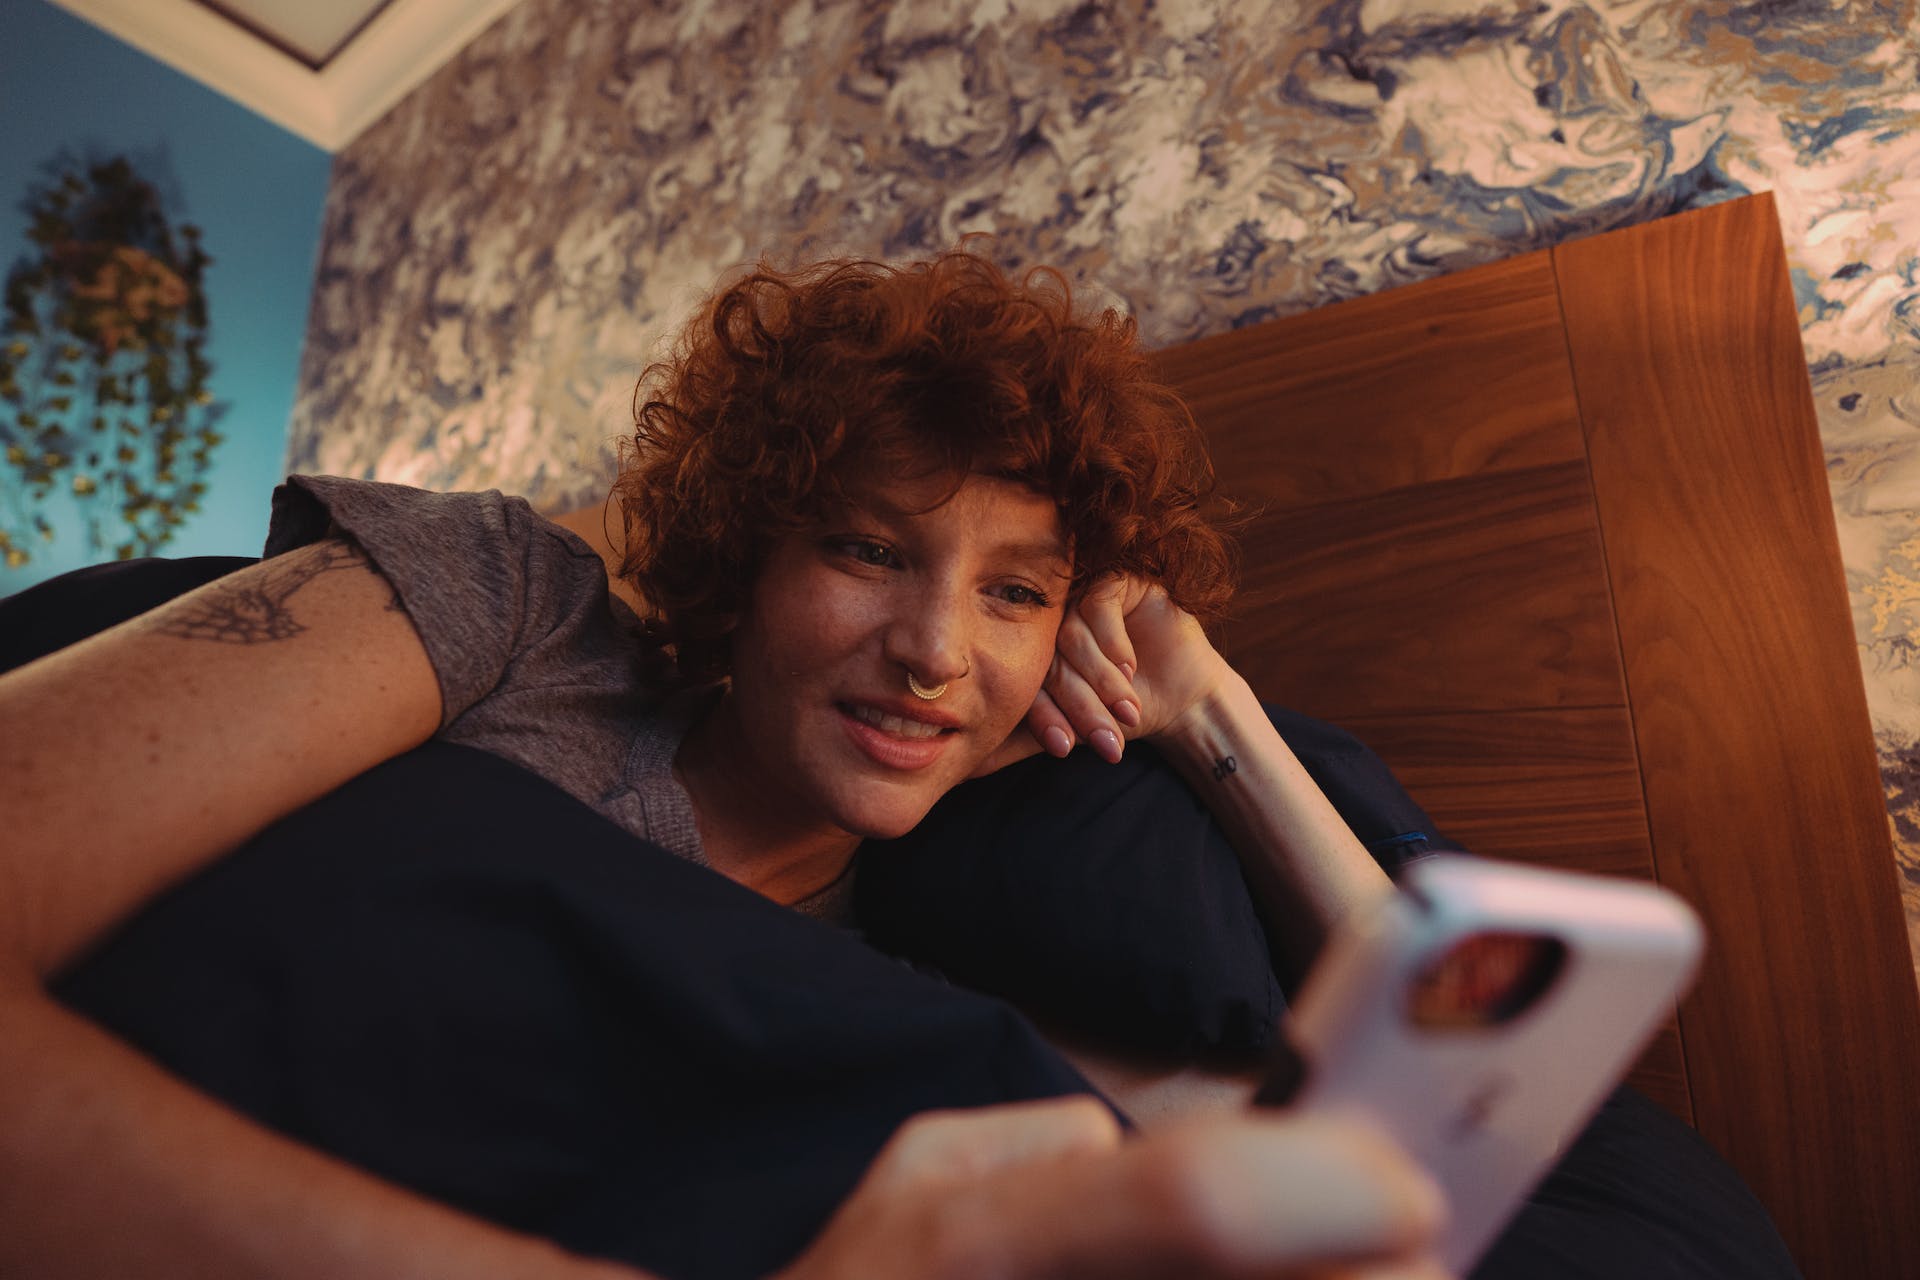 A woman using her phone on the bed | Source: Pexels